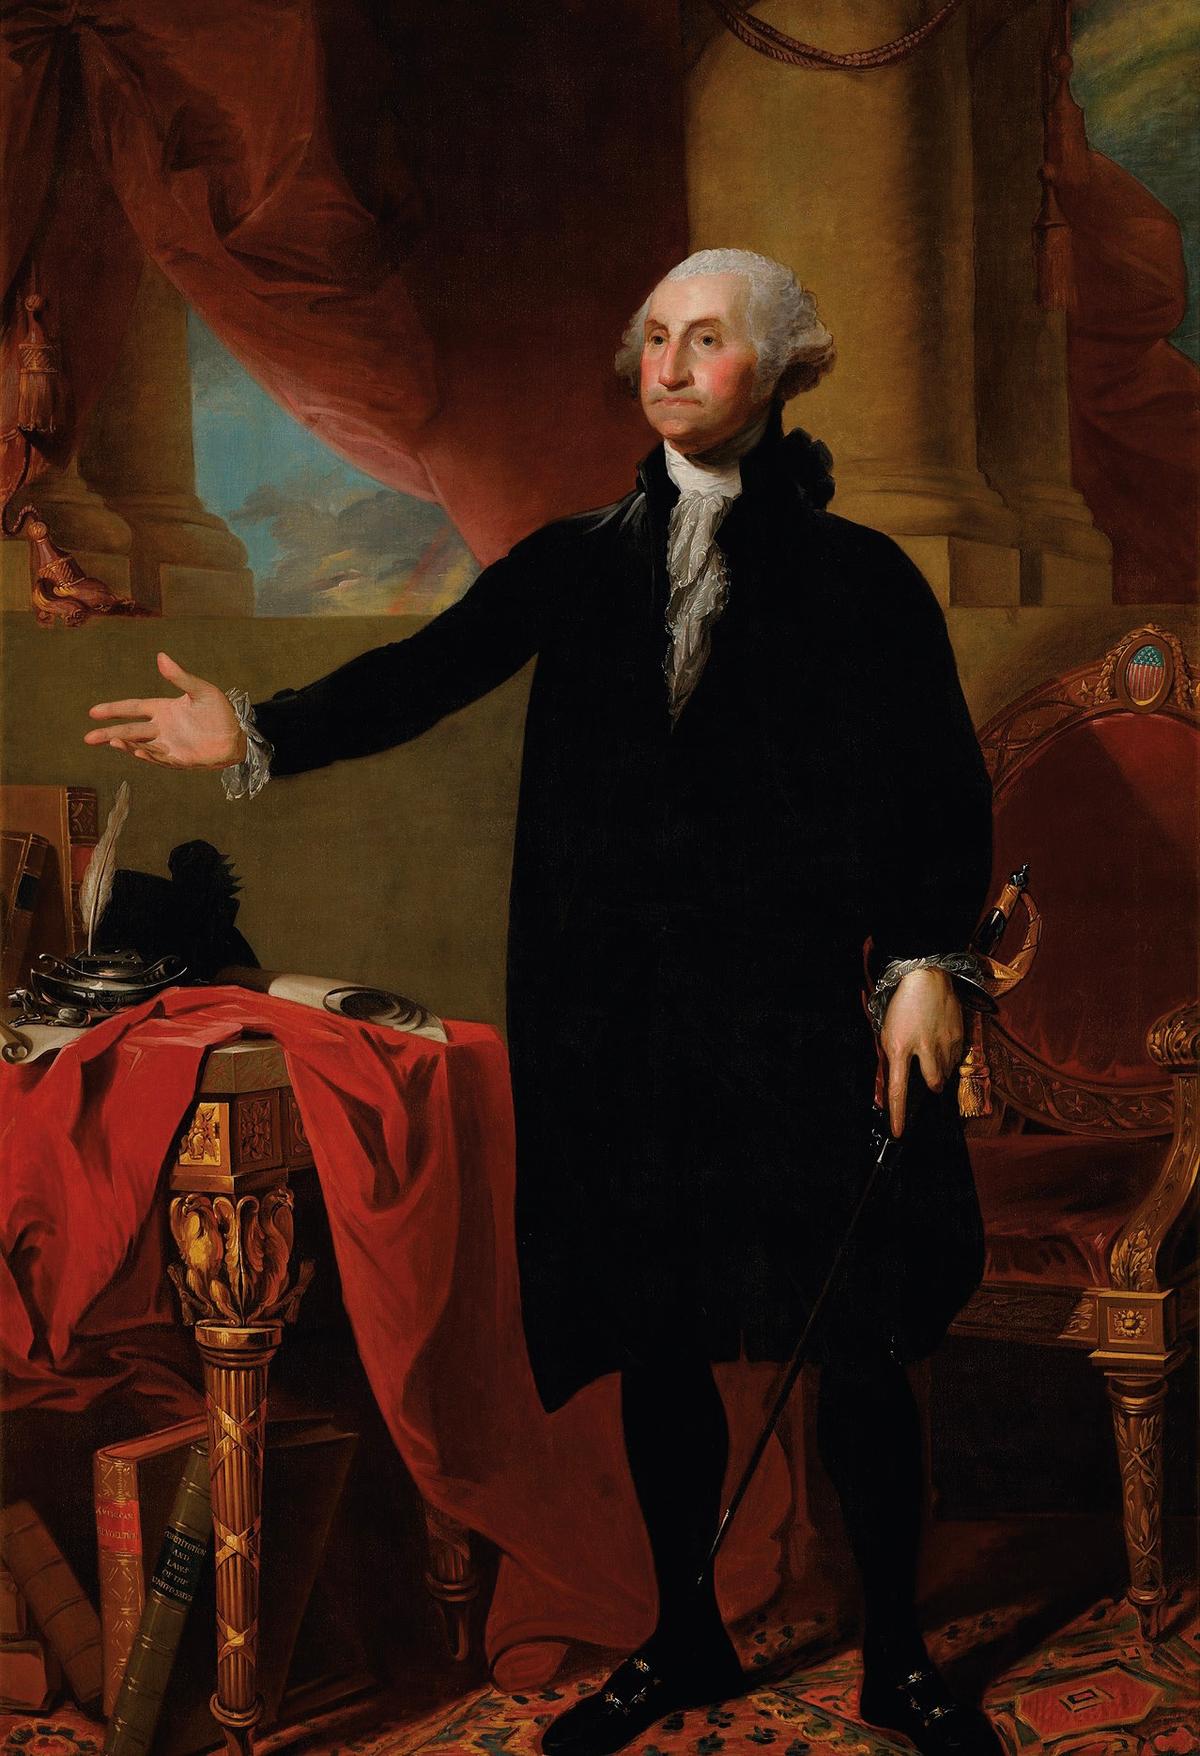 Dolley Madison saved Washington's portrait when the British set fire to the President’s House in 1814. "George Washington," 1797, by Gilbert Stuart. Oil on canvas. White House, Washington. (Public Domain)